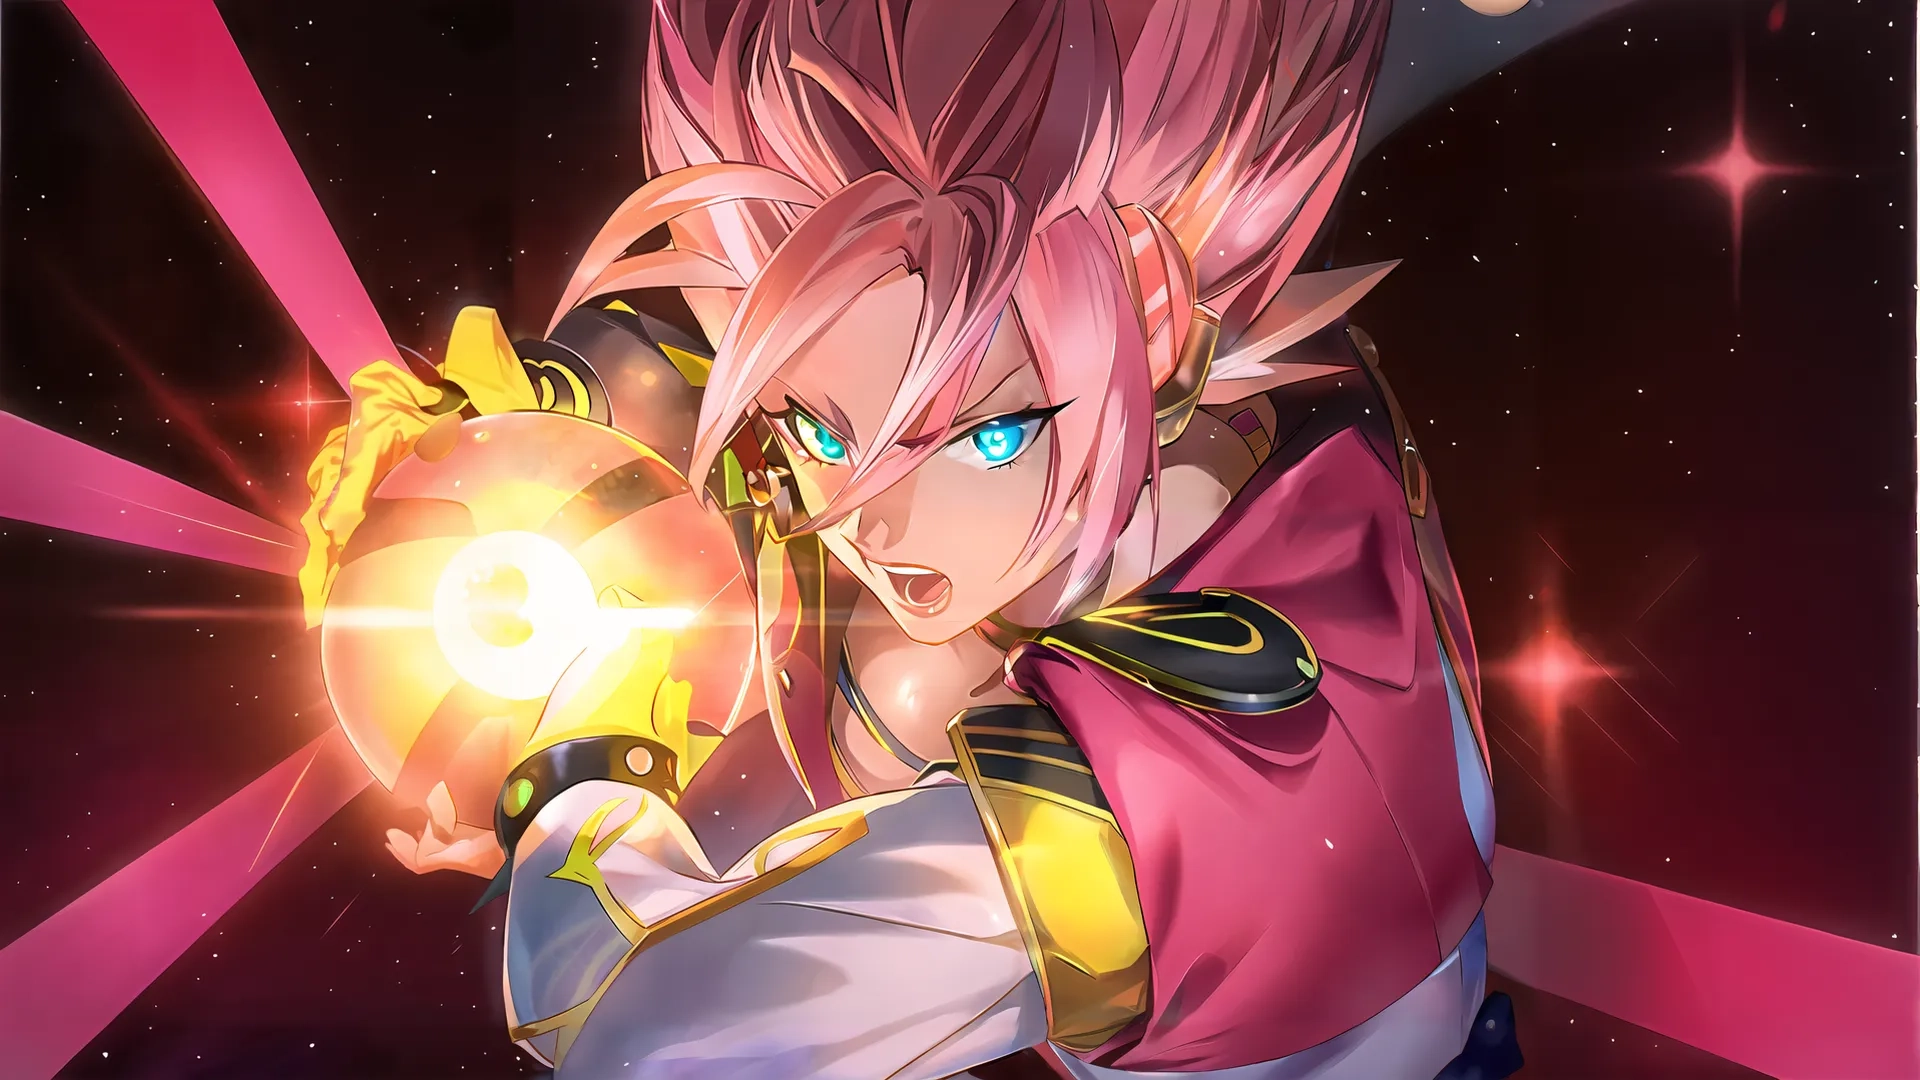 the image shows an illustration of a woman with pink hair holding a light in hand and surrounded by stars and colorful lights around her neck
